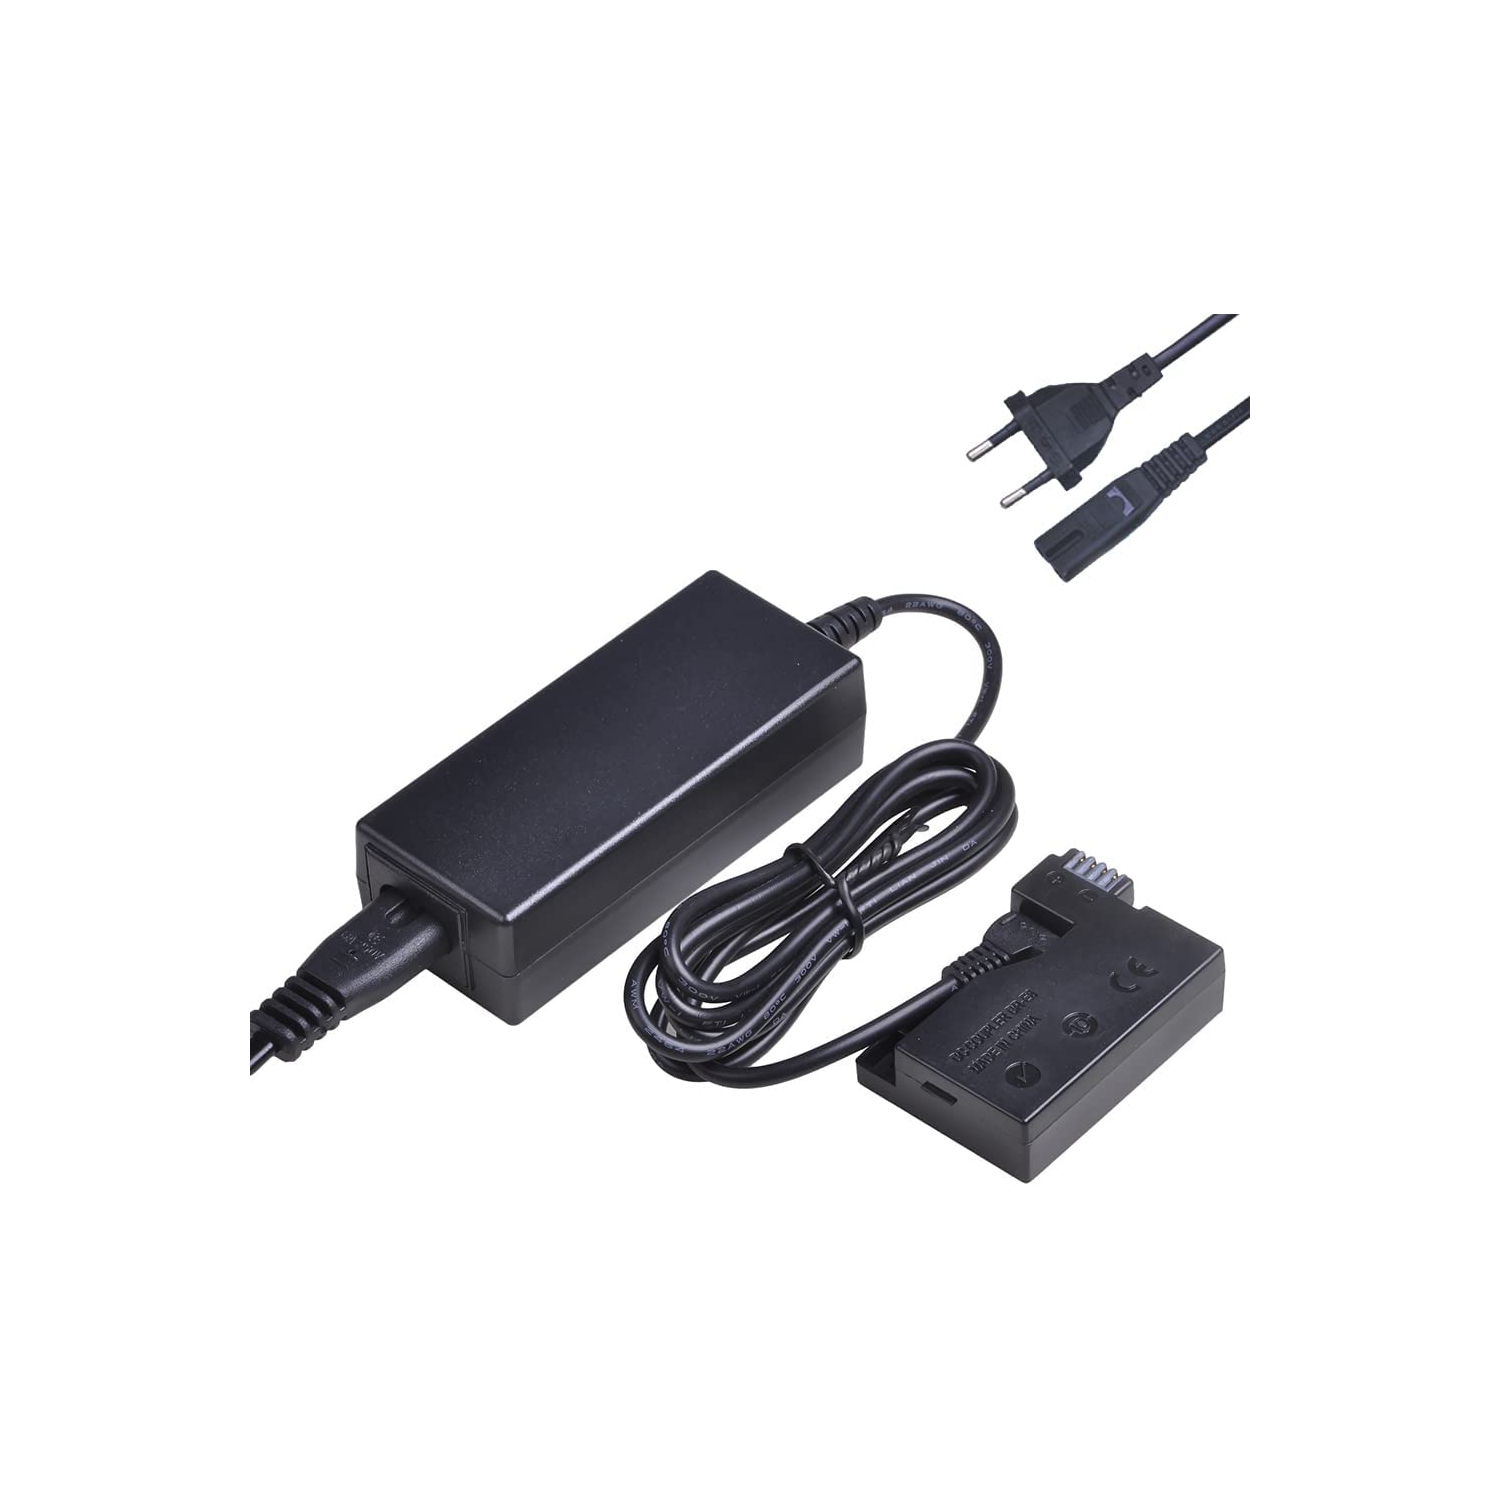 Dolaer ACK-E8 AC Power Adapter with DR-E8 DC Coupler Charger Kits Replacement for Canon LP-E8 Battery EOS Rebel T5i T4i T3i T2i Kiss X6 Kiss X5 Kiss X4 700D 650D 600D 550D Cameras